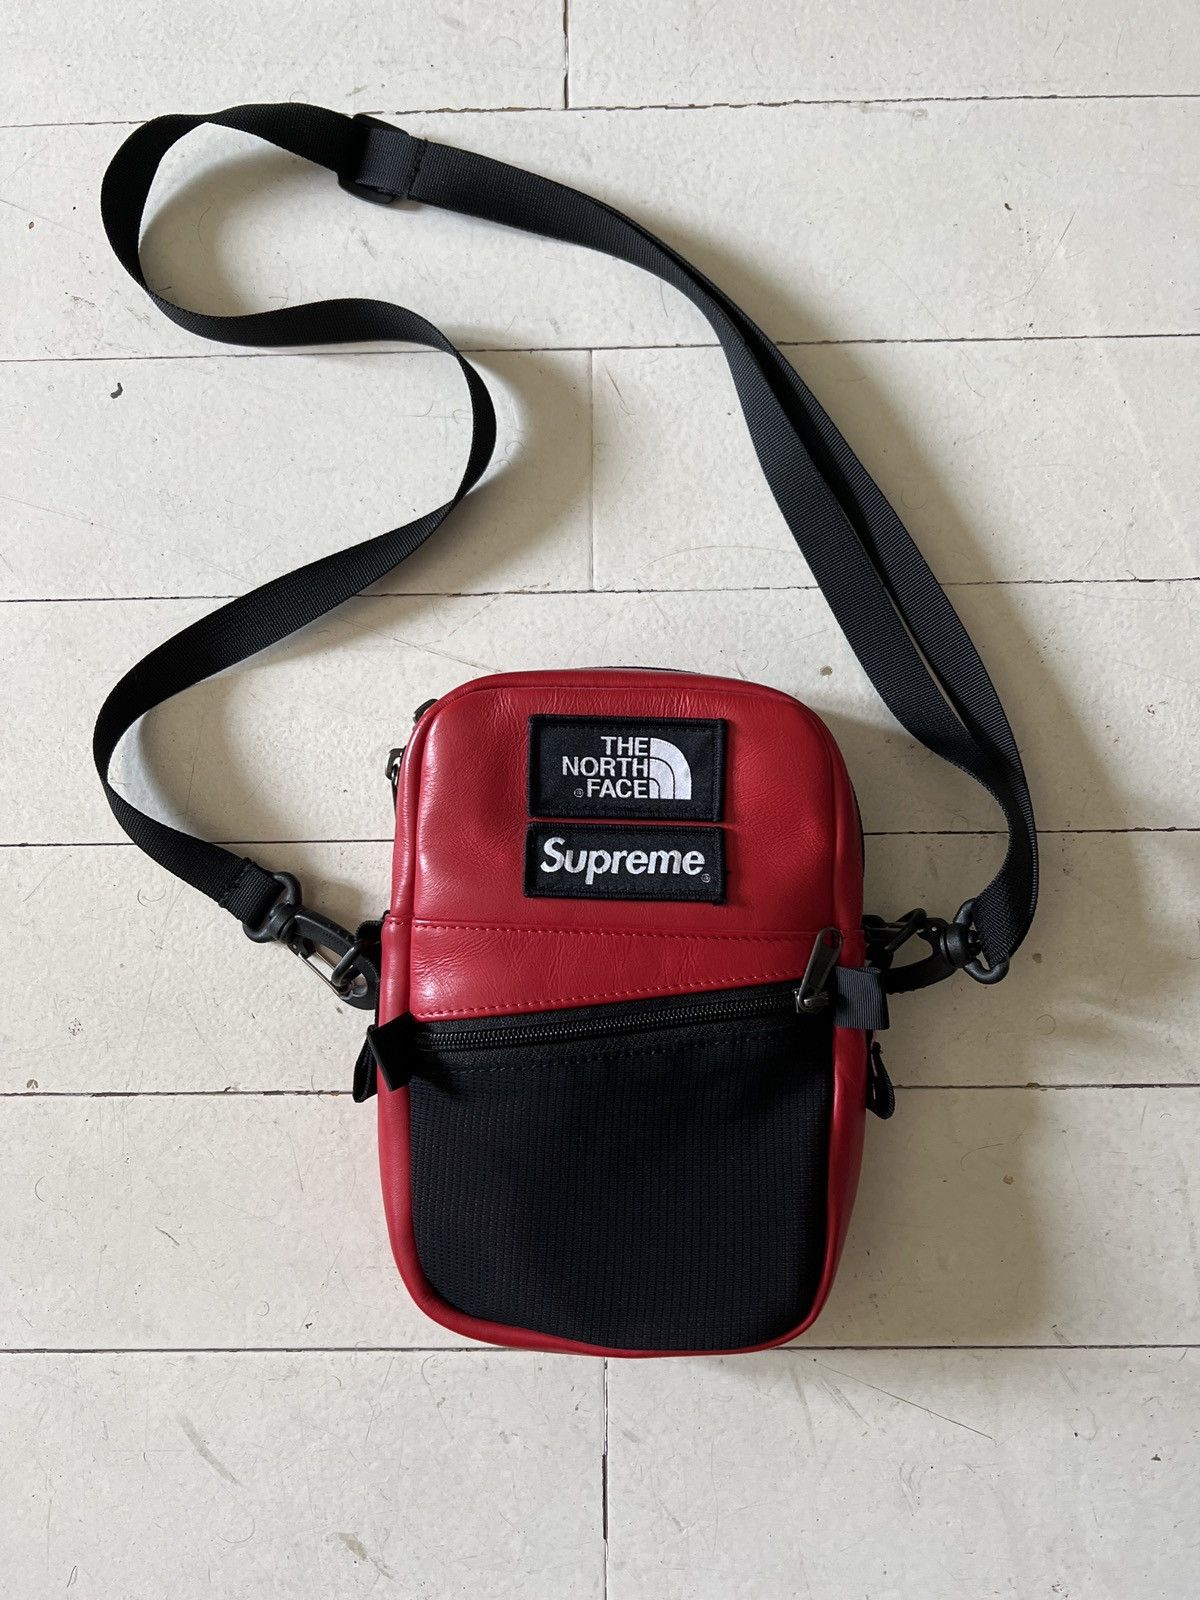 Supreme Supreme x The North Face Red Leather Shoulder Bag (FW18) | Grailed